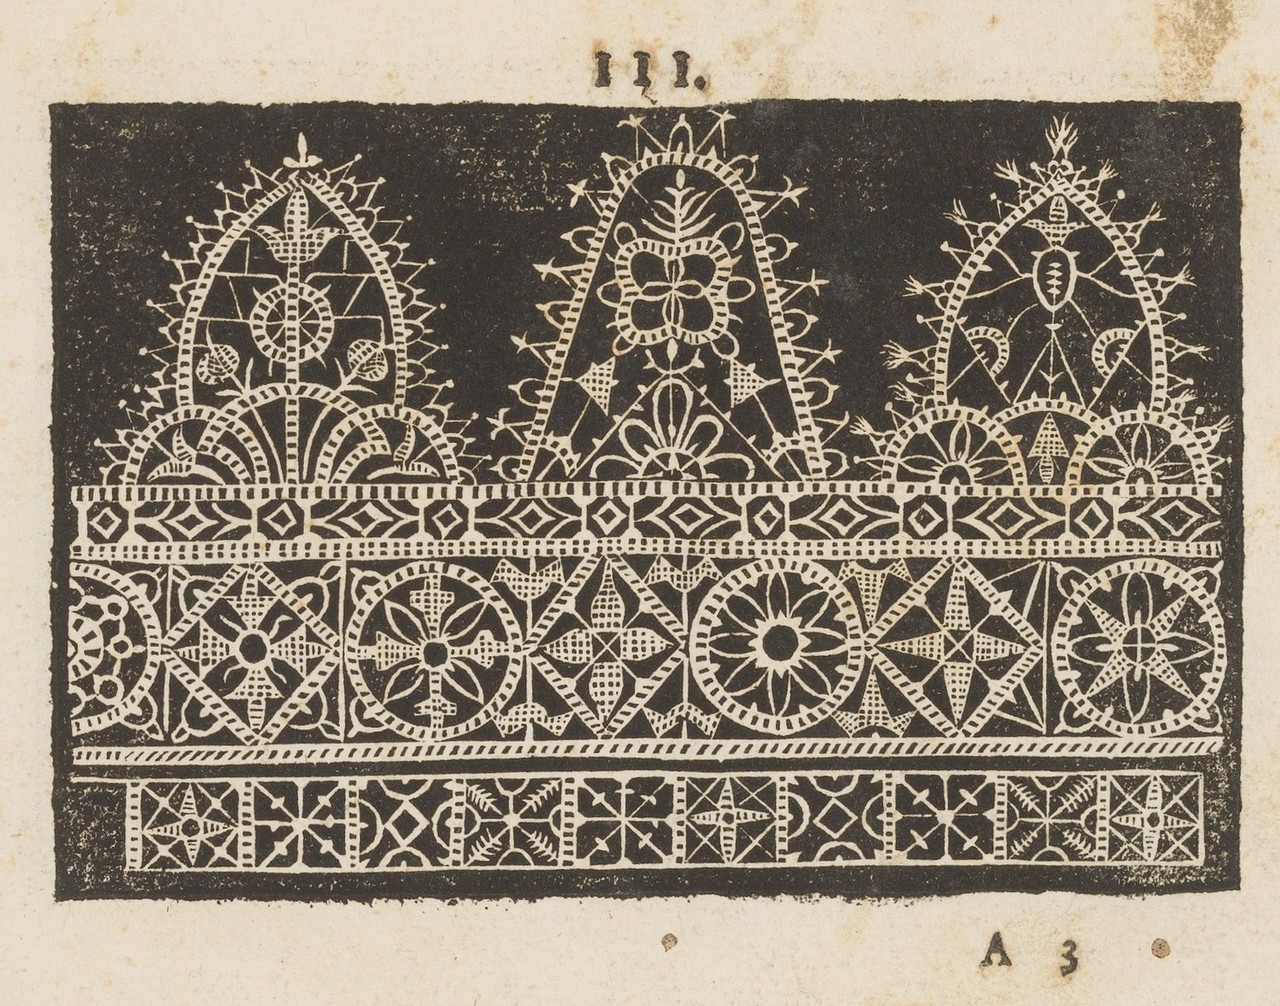 16th century Italian lace patterns. Bazzachi, — Houghton Library